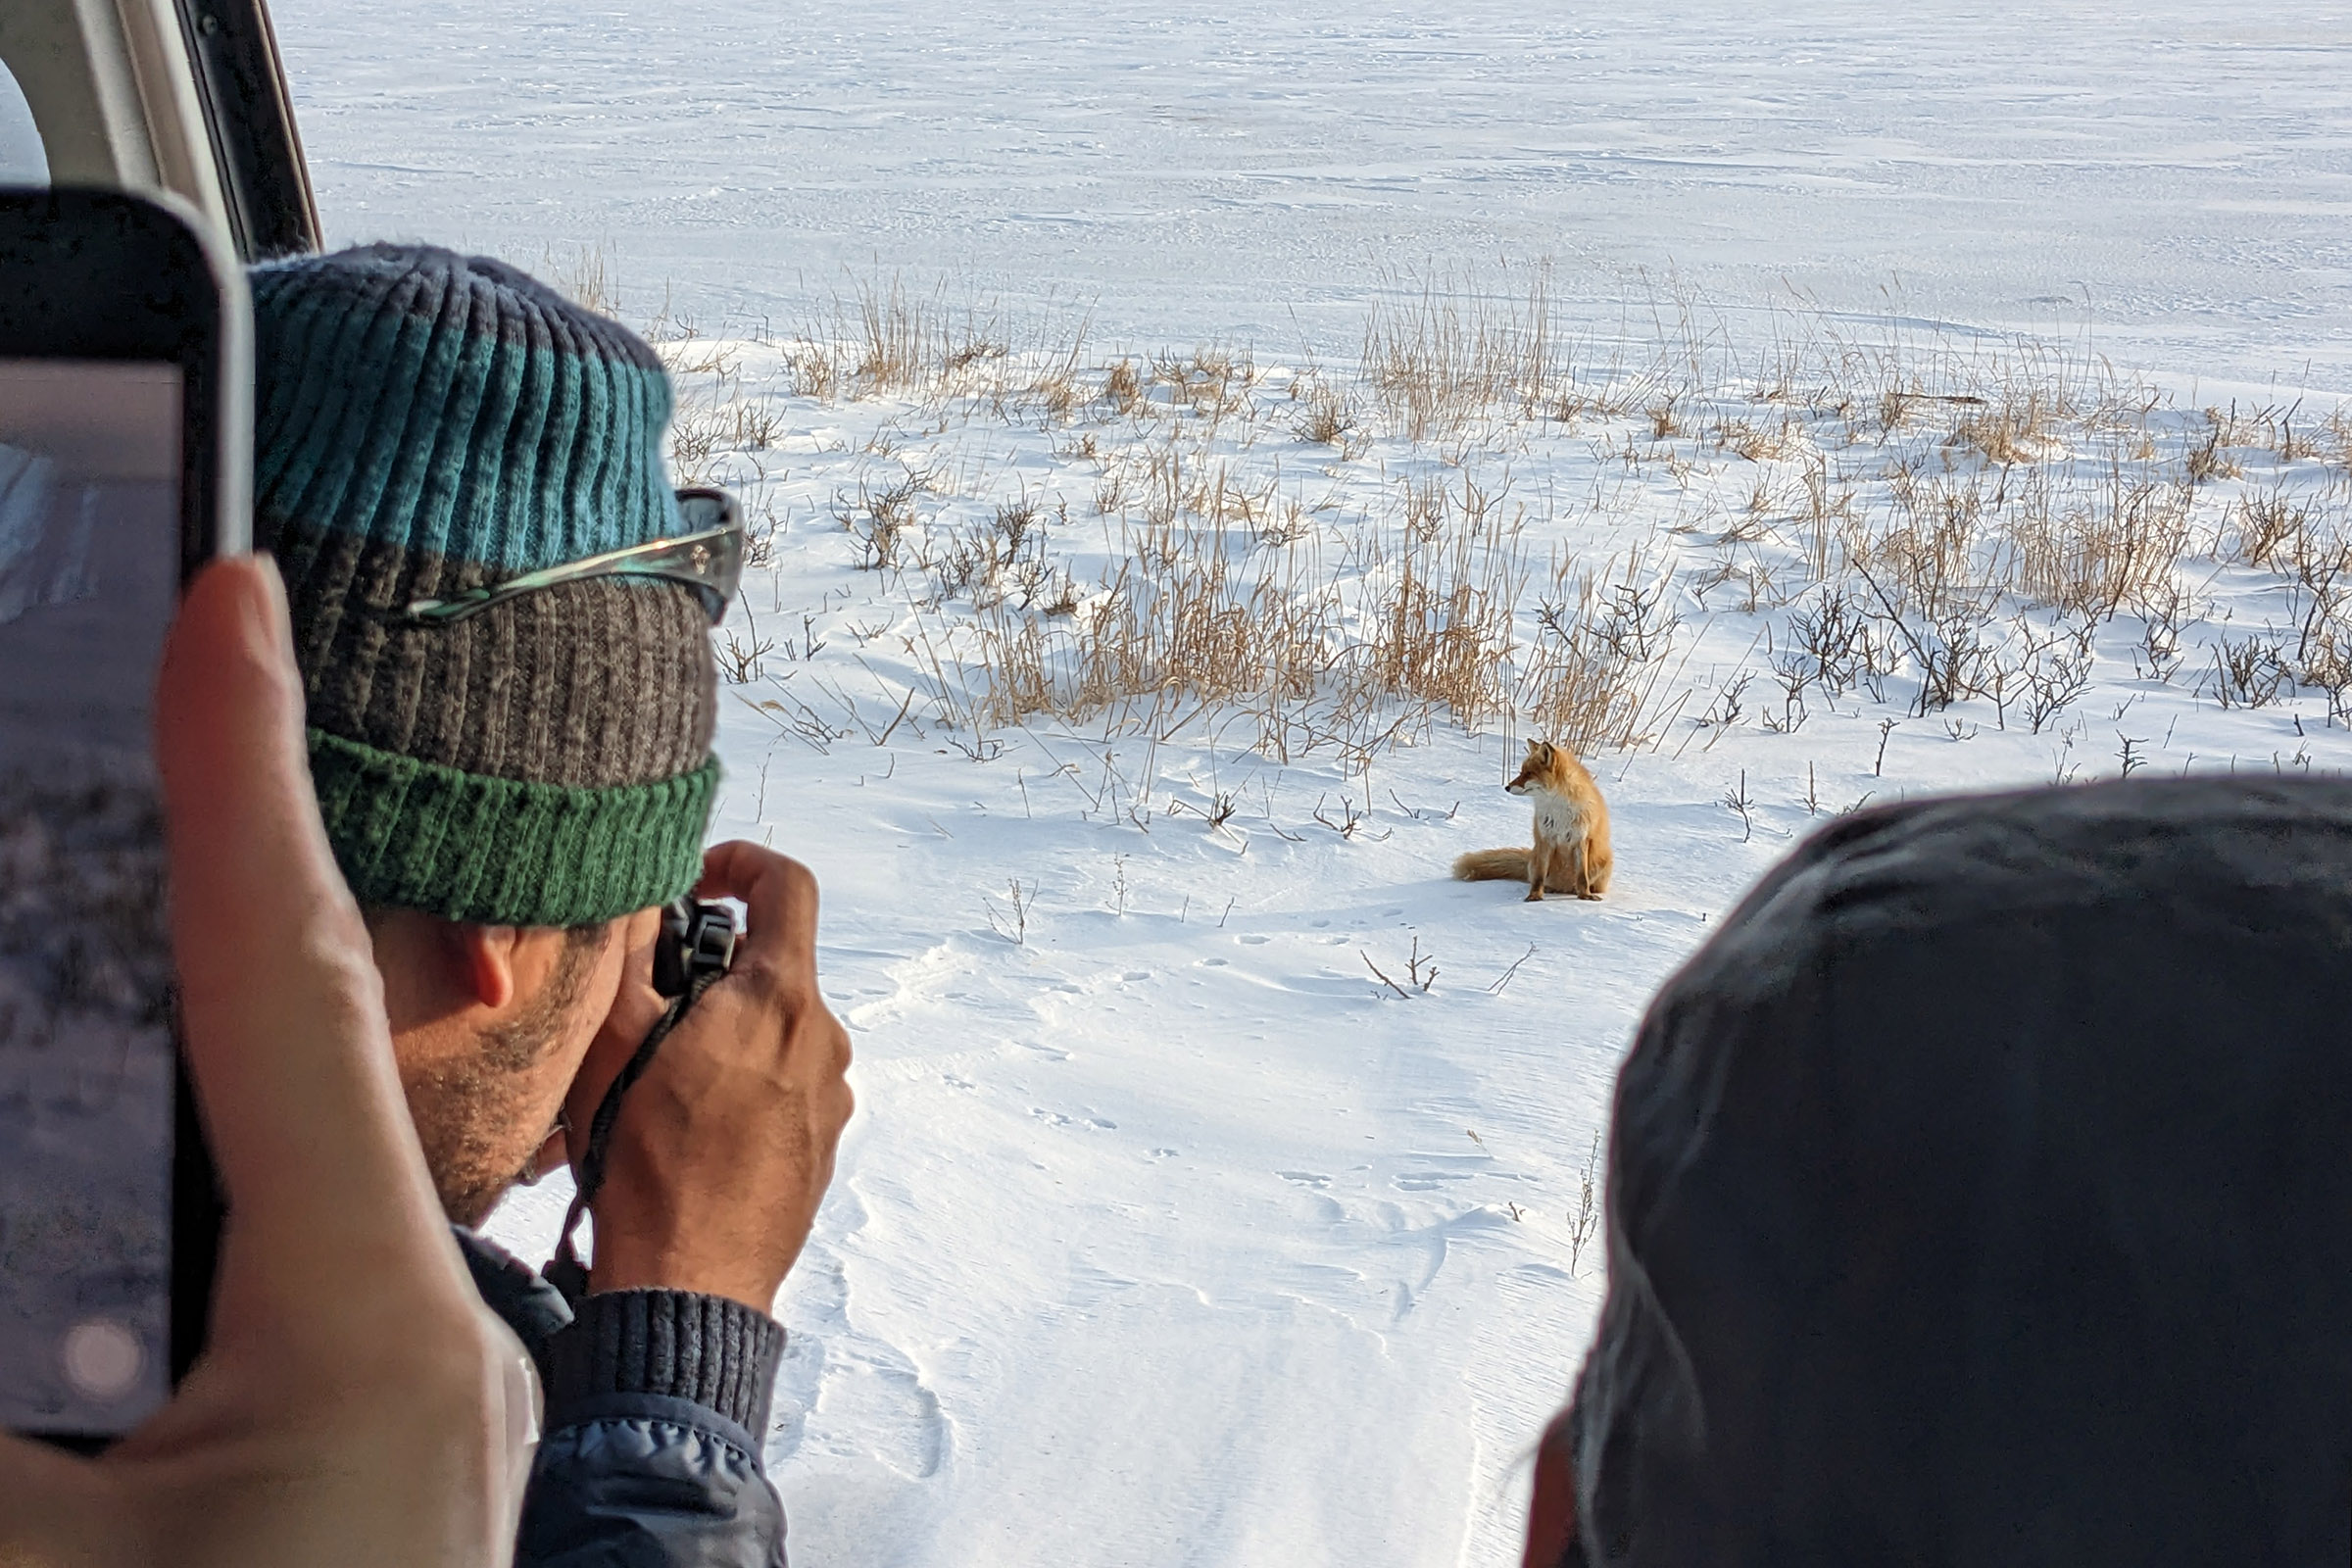 A group of tourists photograph a red fox from a car. The fox is sitting on the snow covered shore of the Notsuke Peninsula.